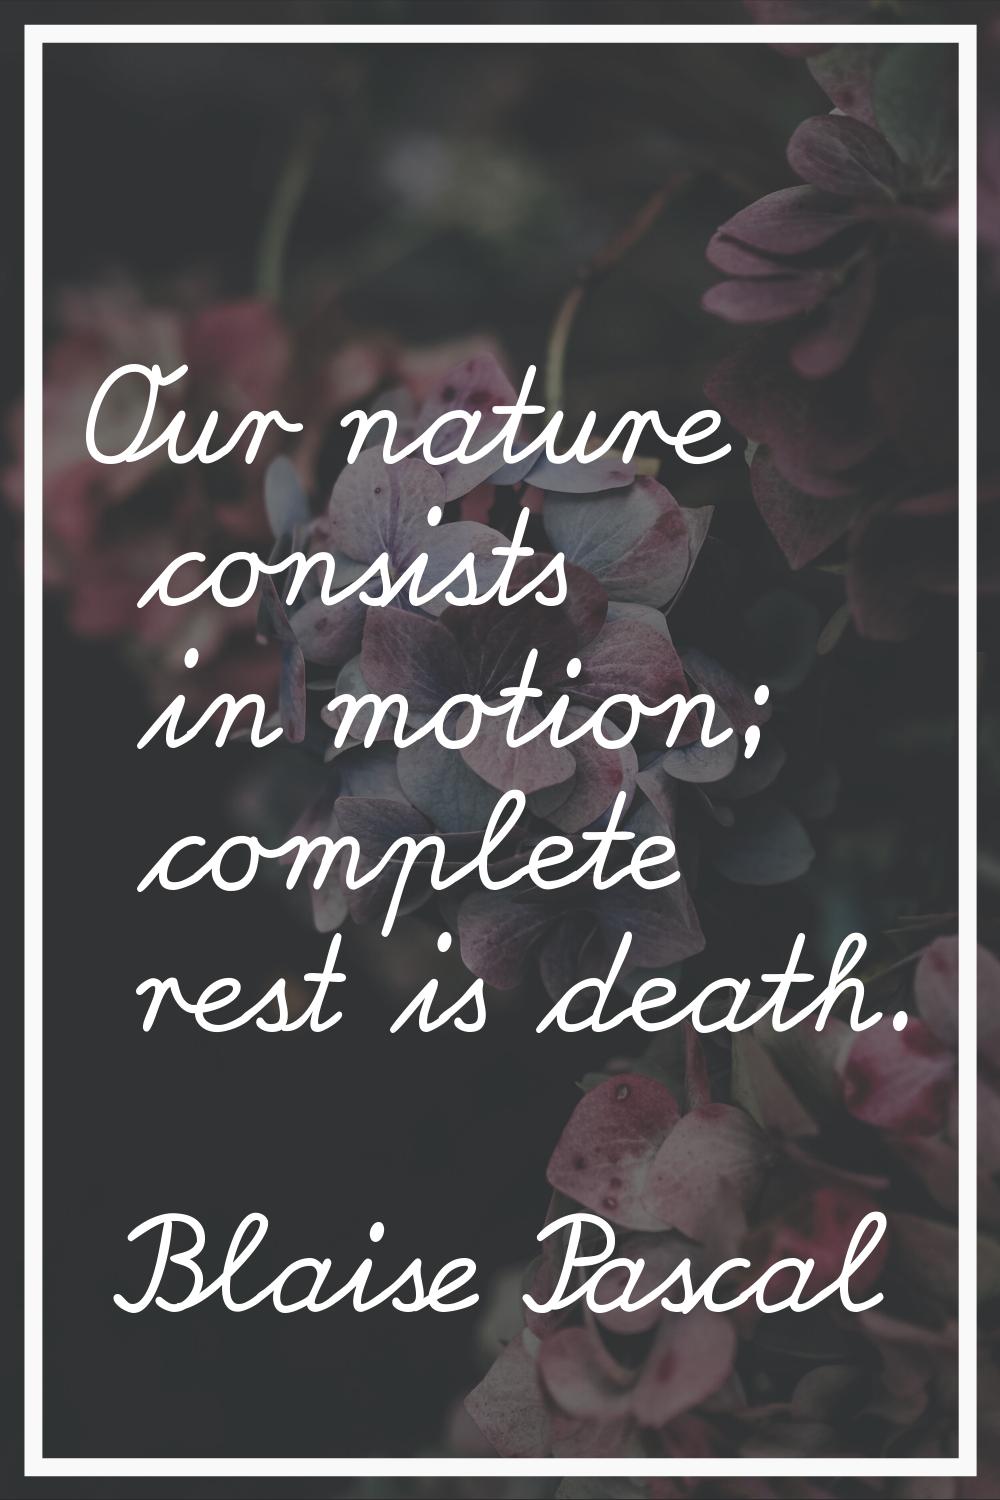 Our nature consists in motion; complete rest is death.